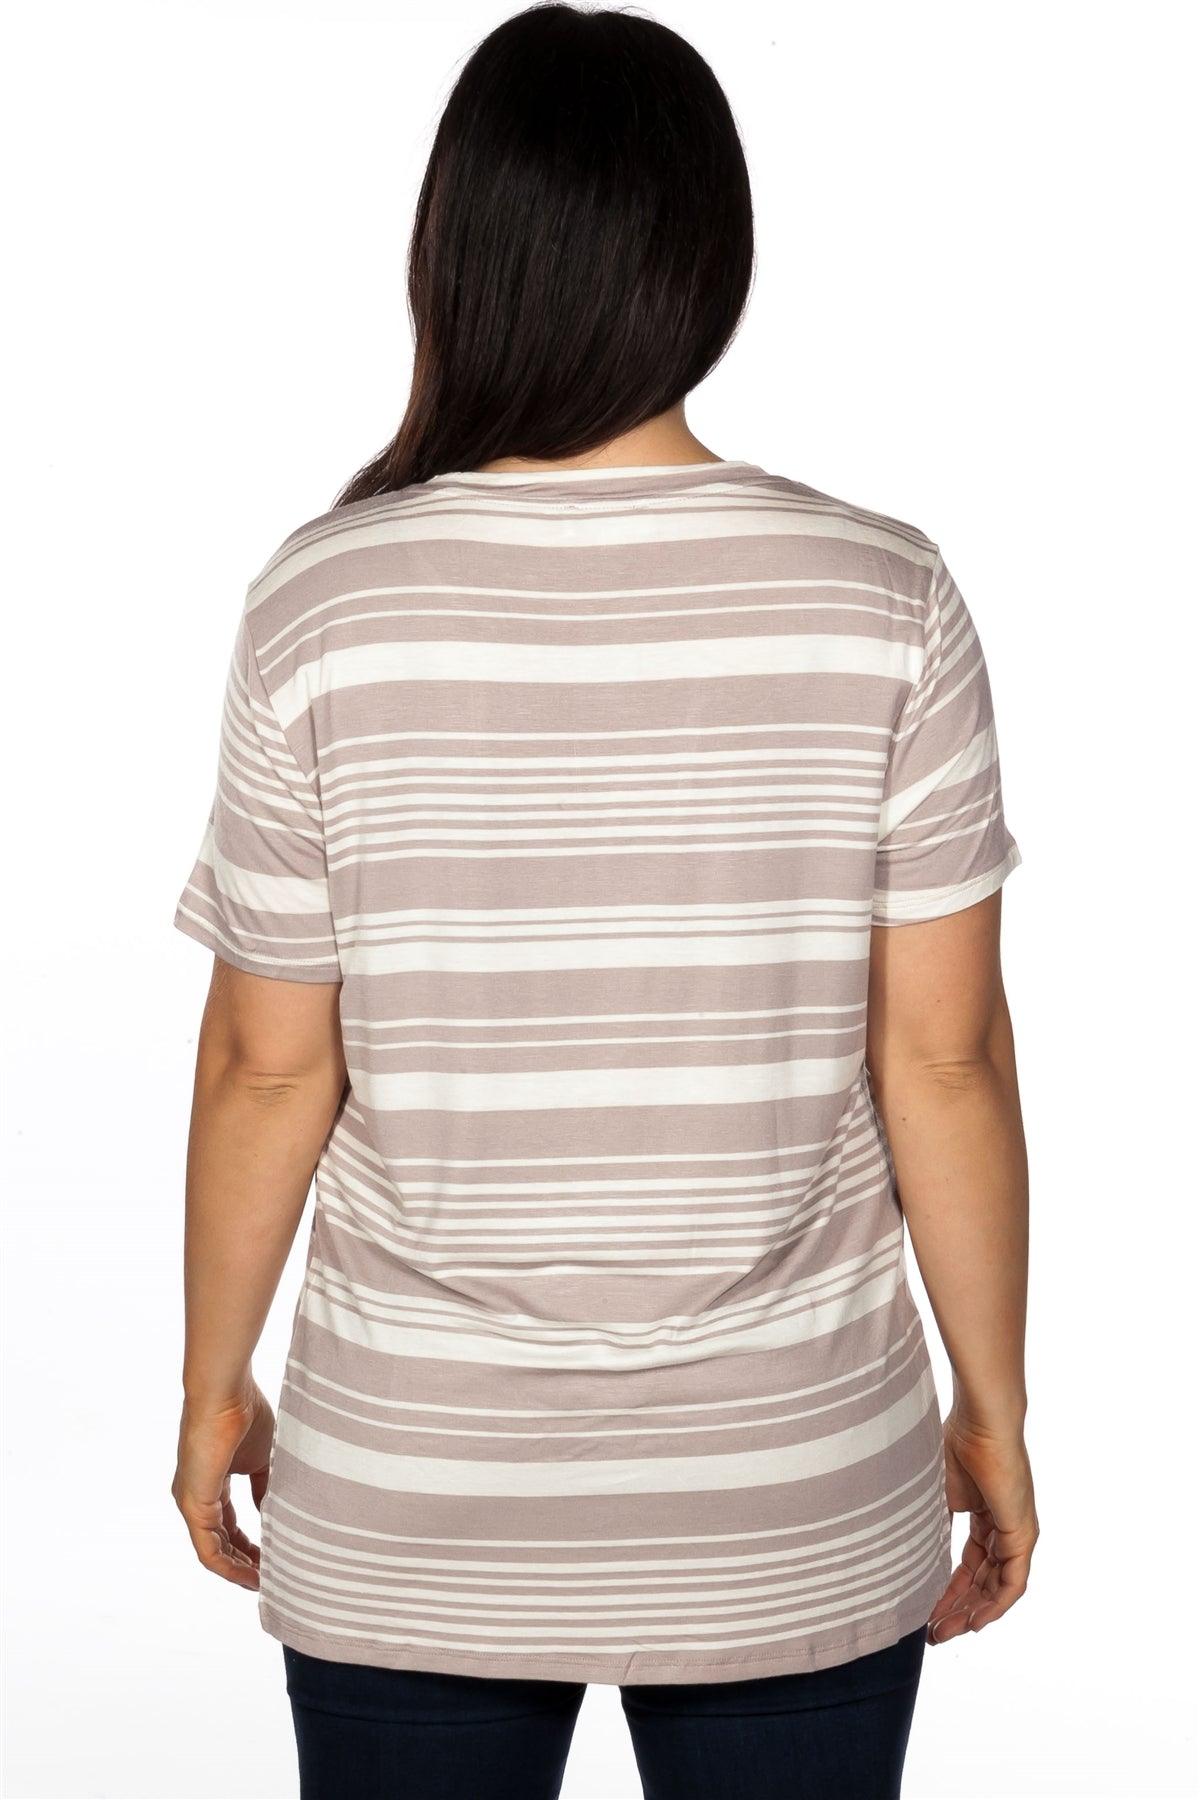 Junior Plus Size Khaki Striped and Distressed Cut-Out Top /2-2-2